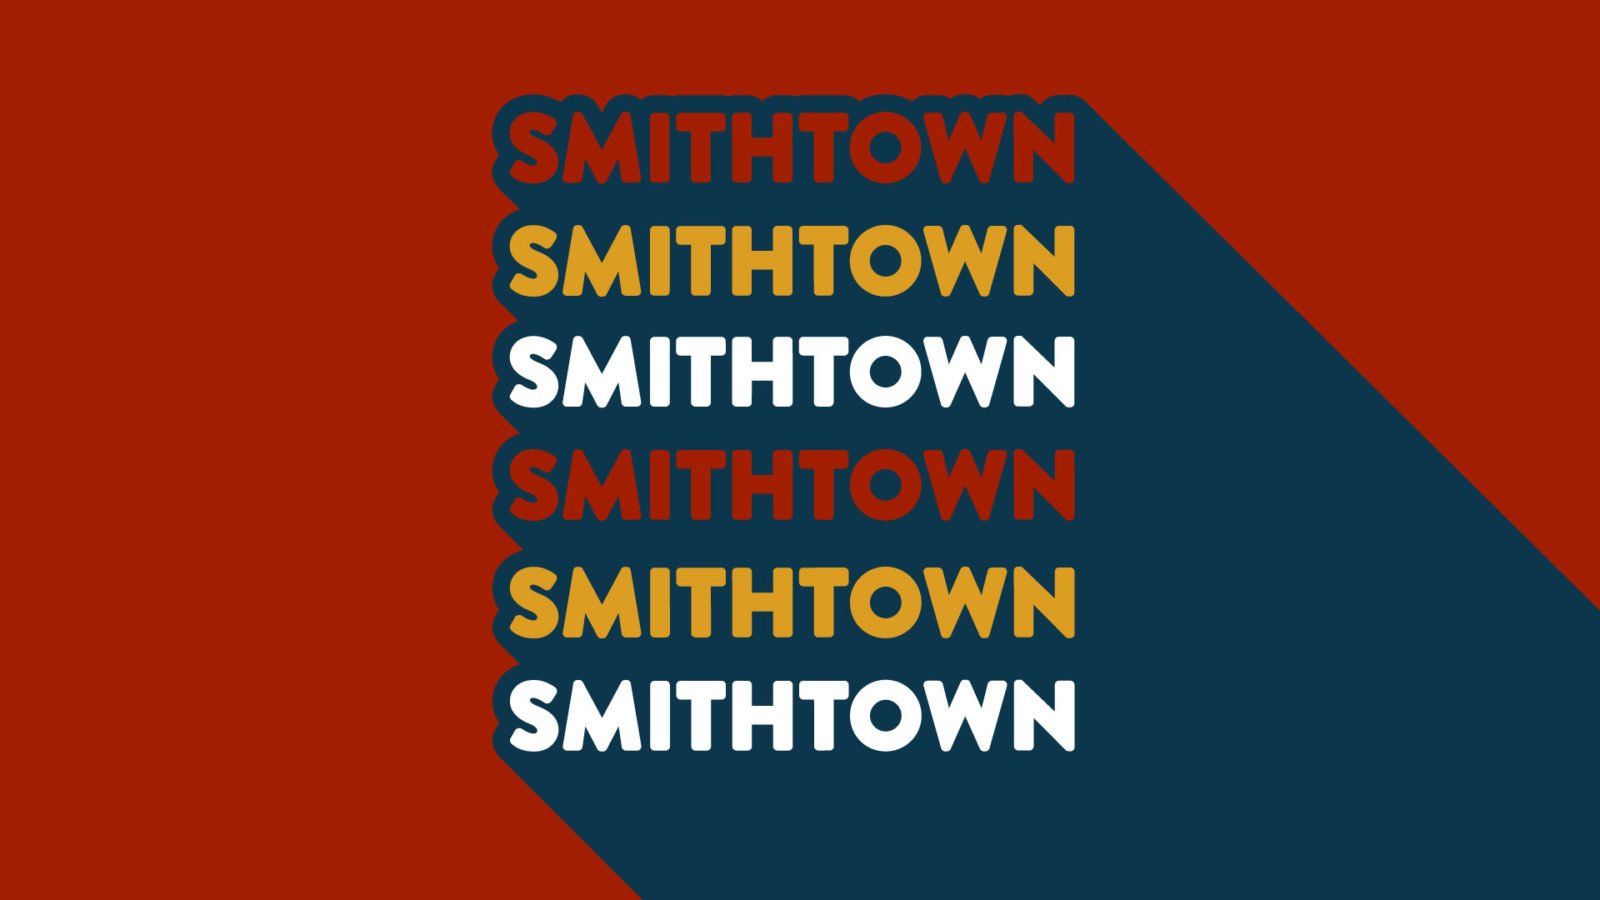 A Brand Identity for Smithtown Seafood by Bullhorn Creative